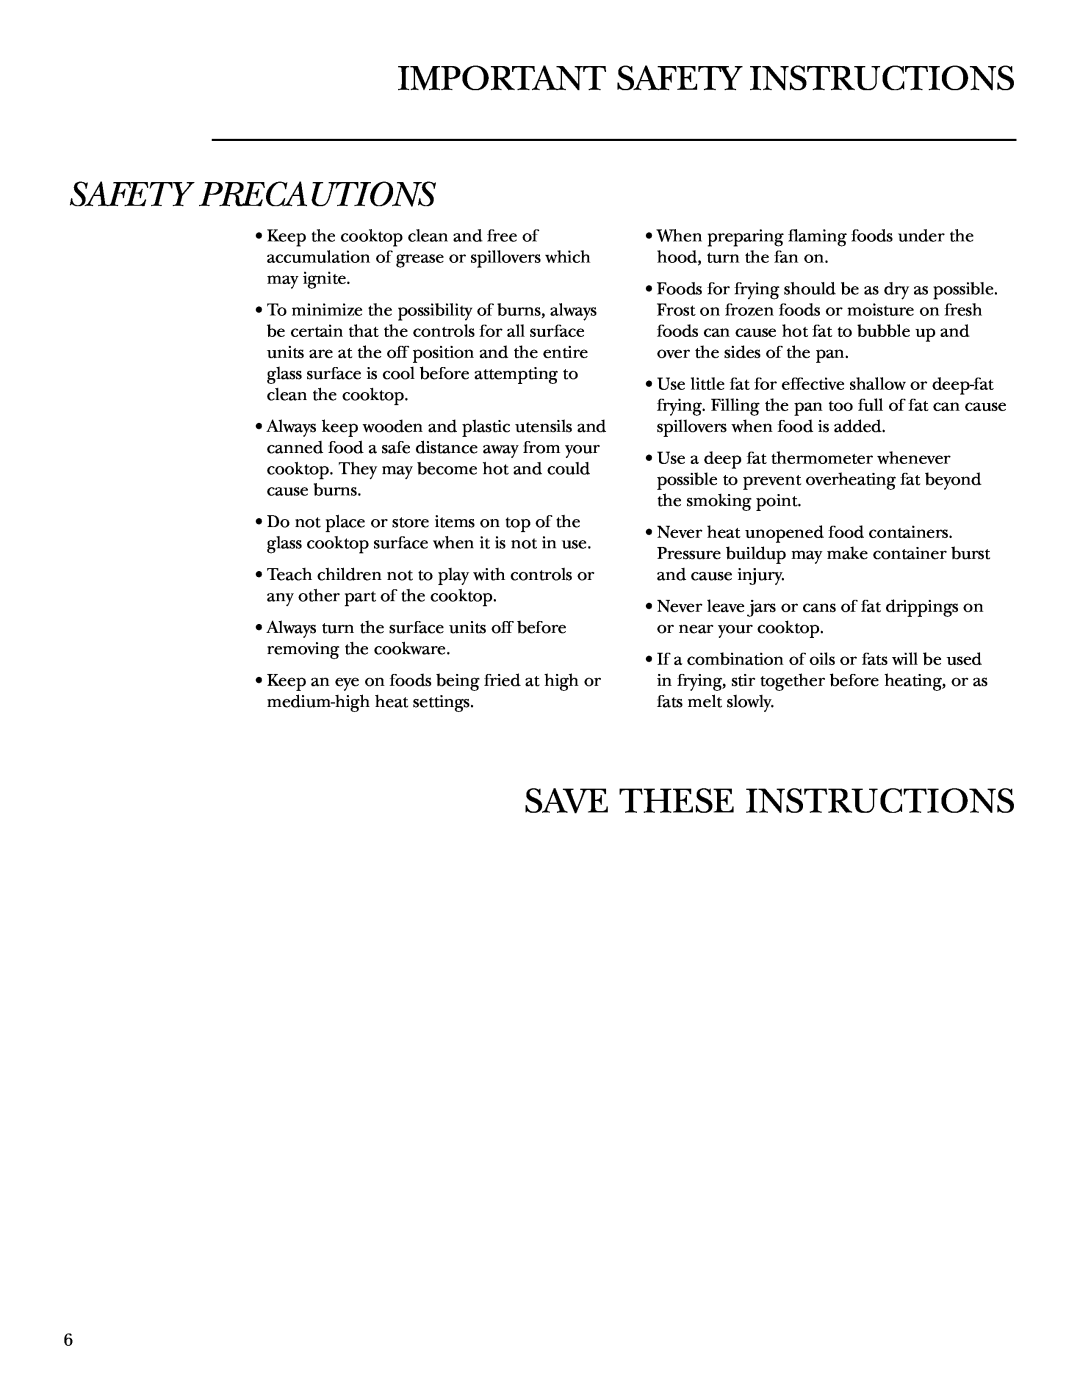 GE ZEU769 owner manual Save These Instructions, Important Safety Instructions, Safety Precautions 